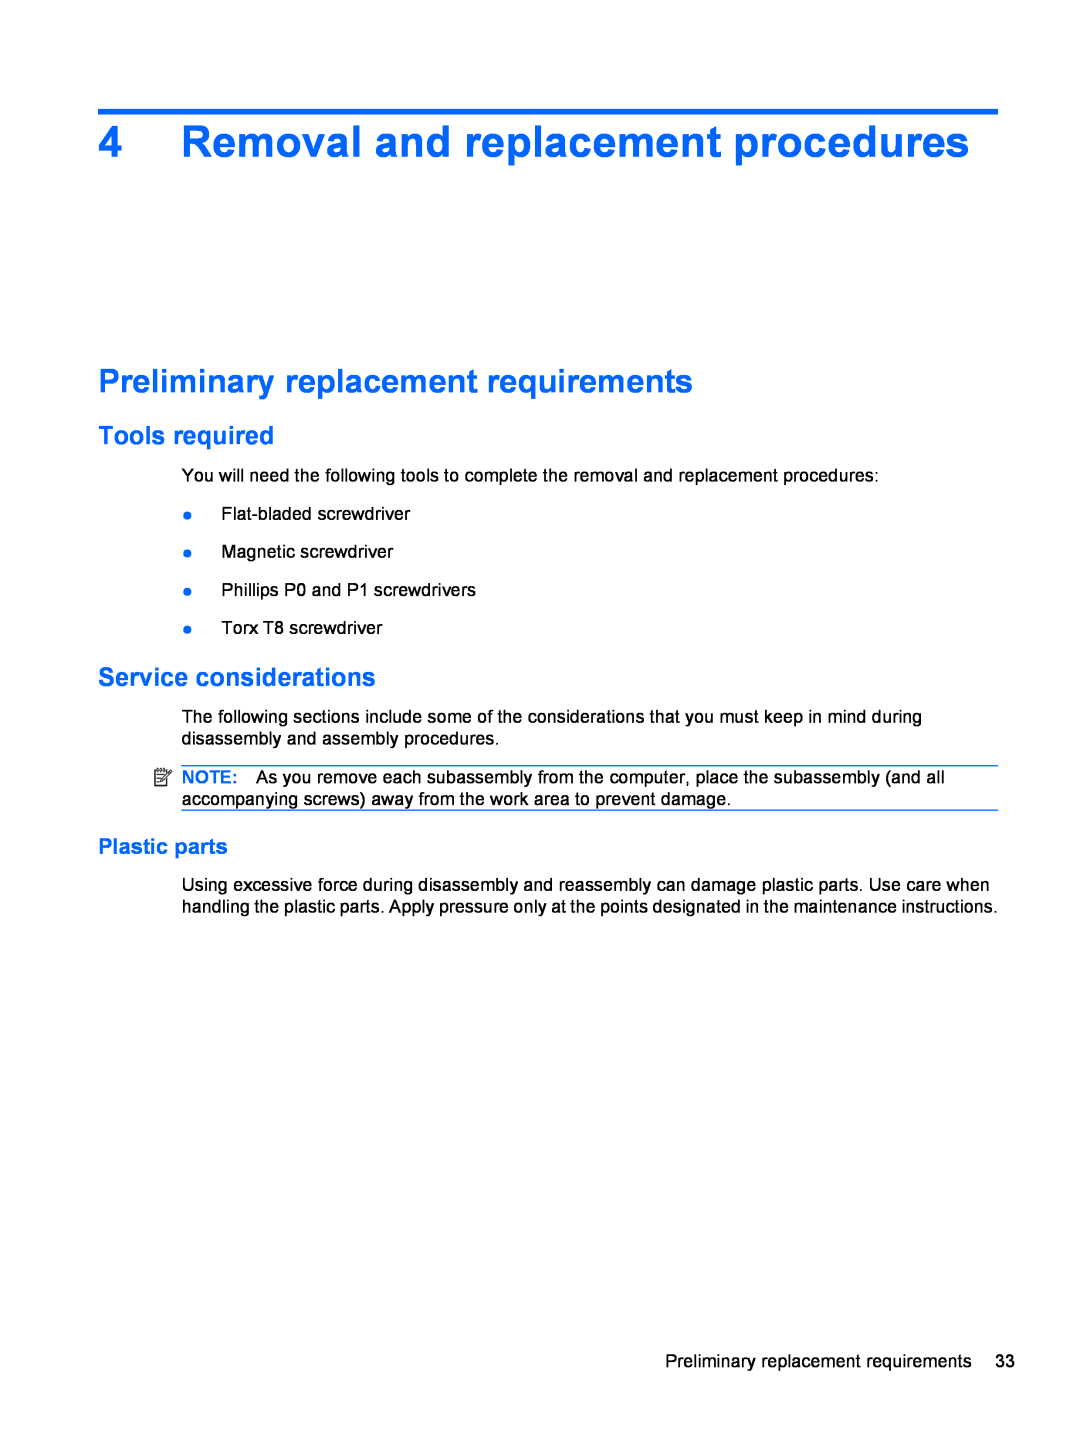 HP FN037UAABA Removal and replacement procedures, Preliminary replacement requirements, Tools required, Plastic parts 